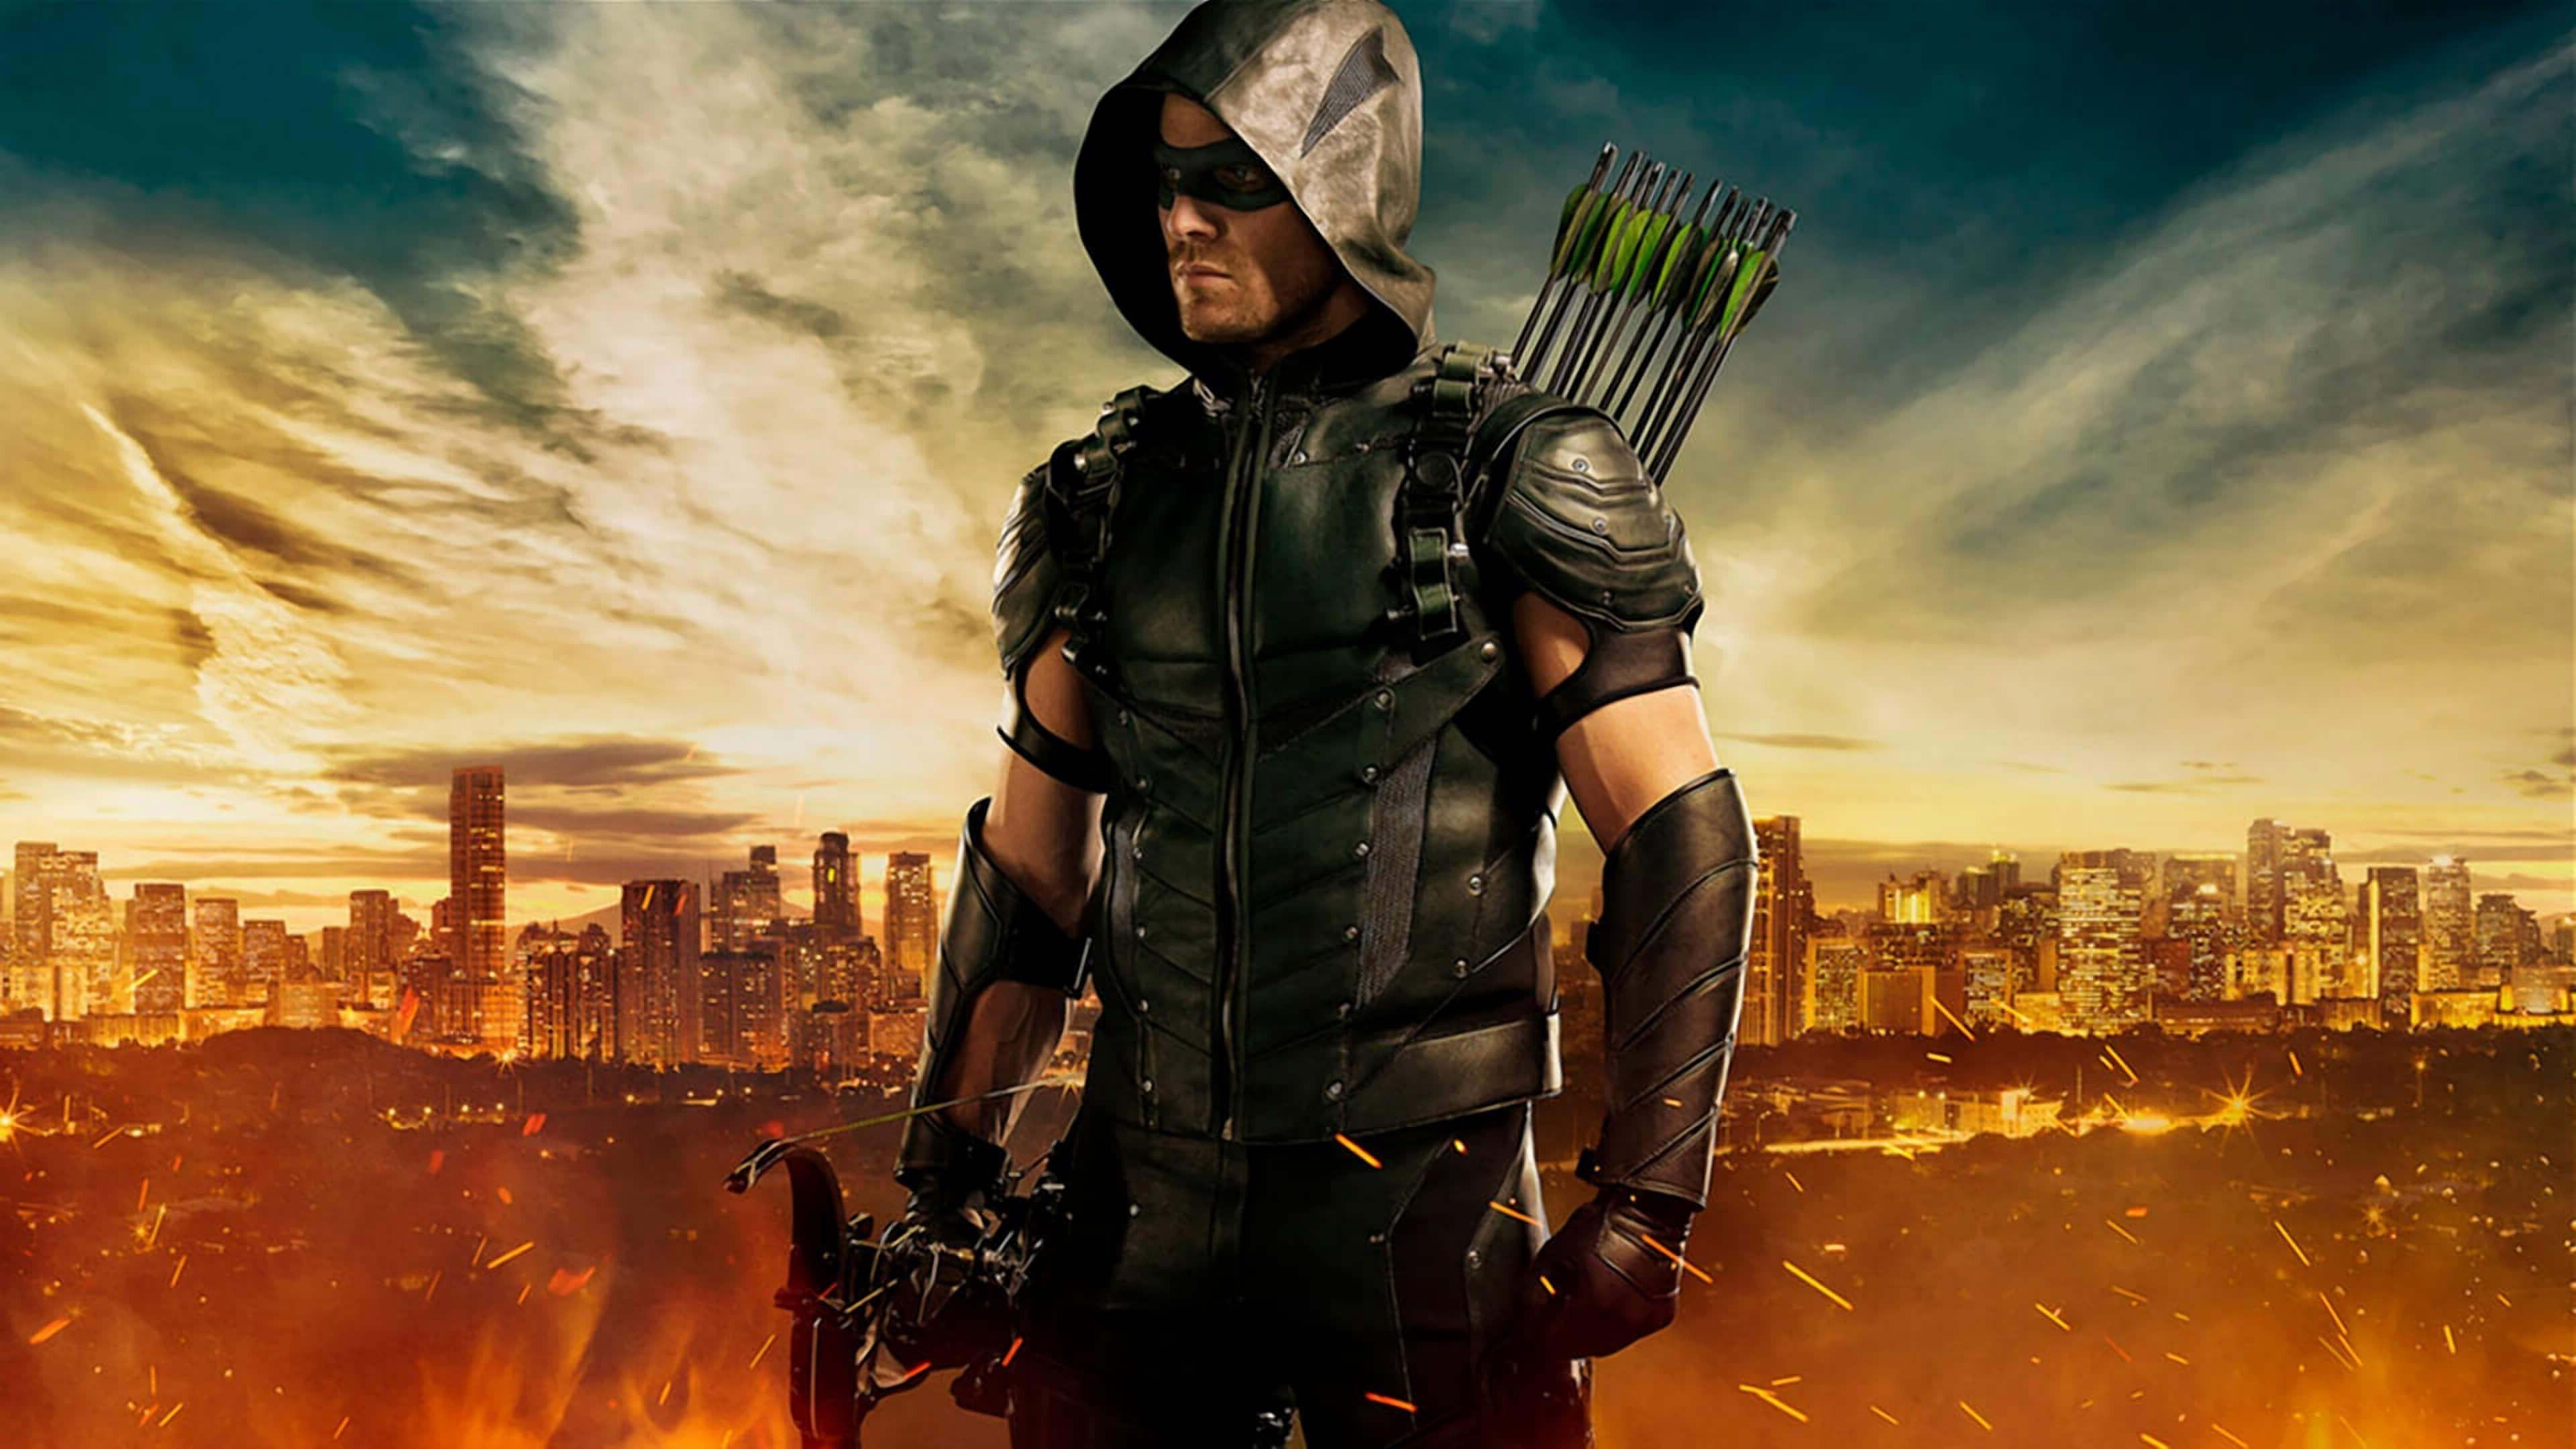 260+ Green Arrow HD Wallpapers and Backgrounds